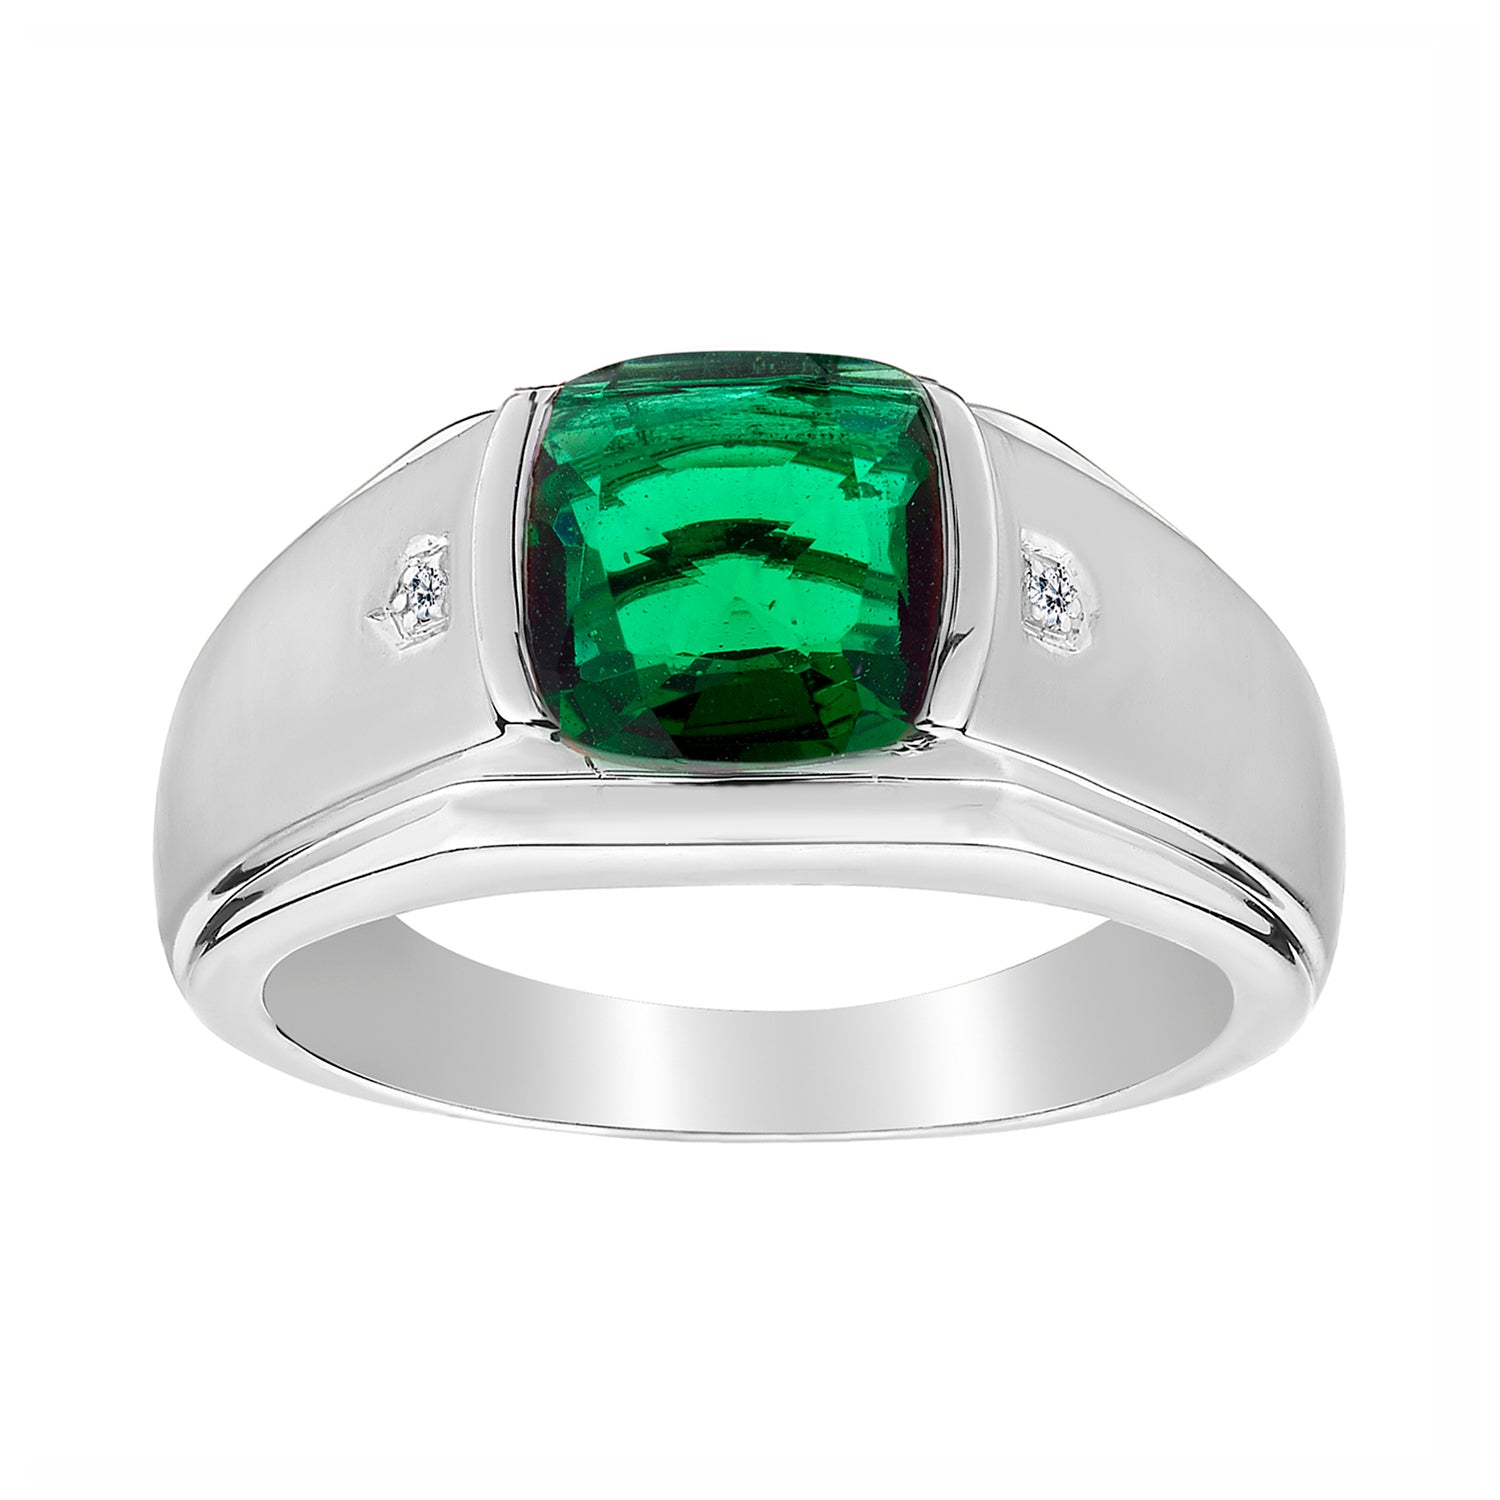 .015 Carat Diamond and Created Emerald Gentleman's Ring, Sterling Silver. Men’s Rings.  - Griffin Jewellery Designs